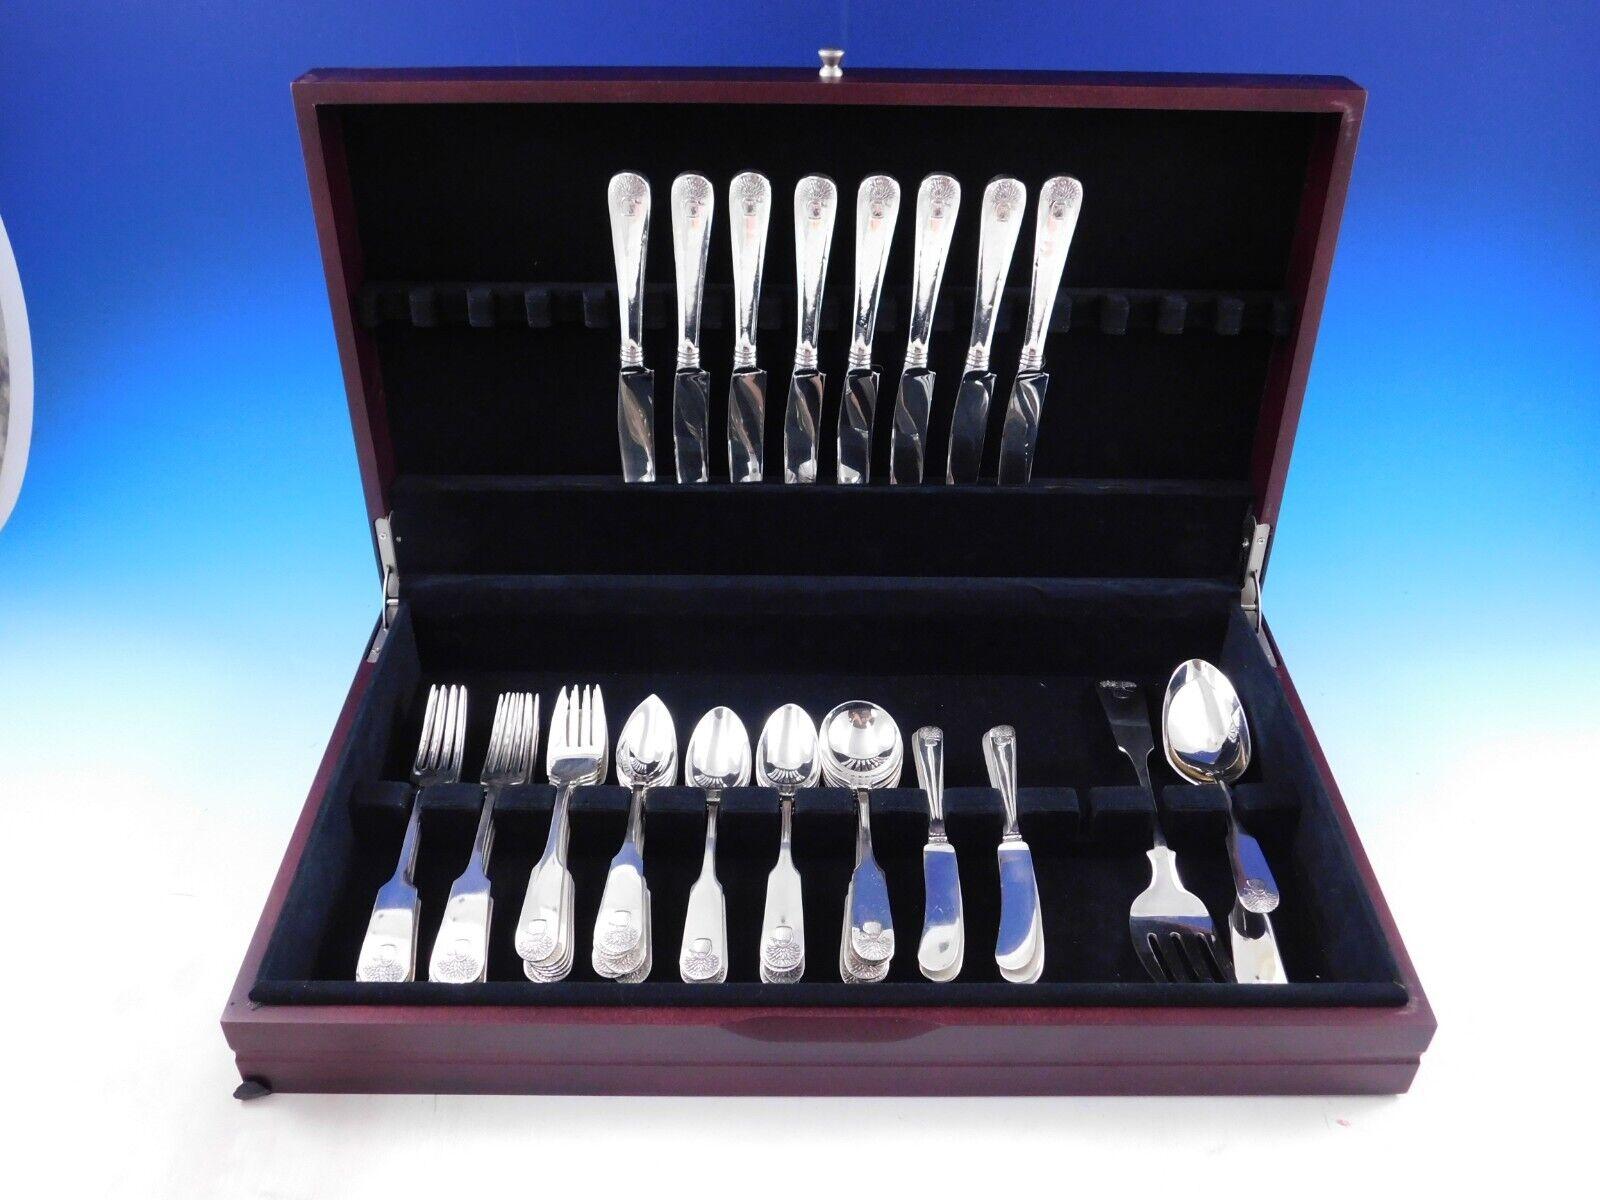 Rare Sheaf of Wheat by Durgin-Gorham sterling silver Flatware set, 48 pieces. This set includes:

8 Knives, 9